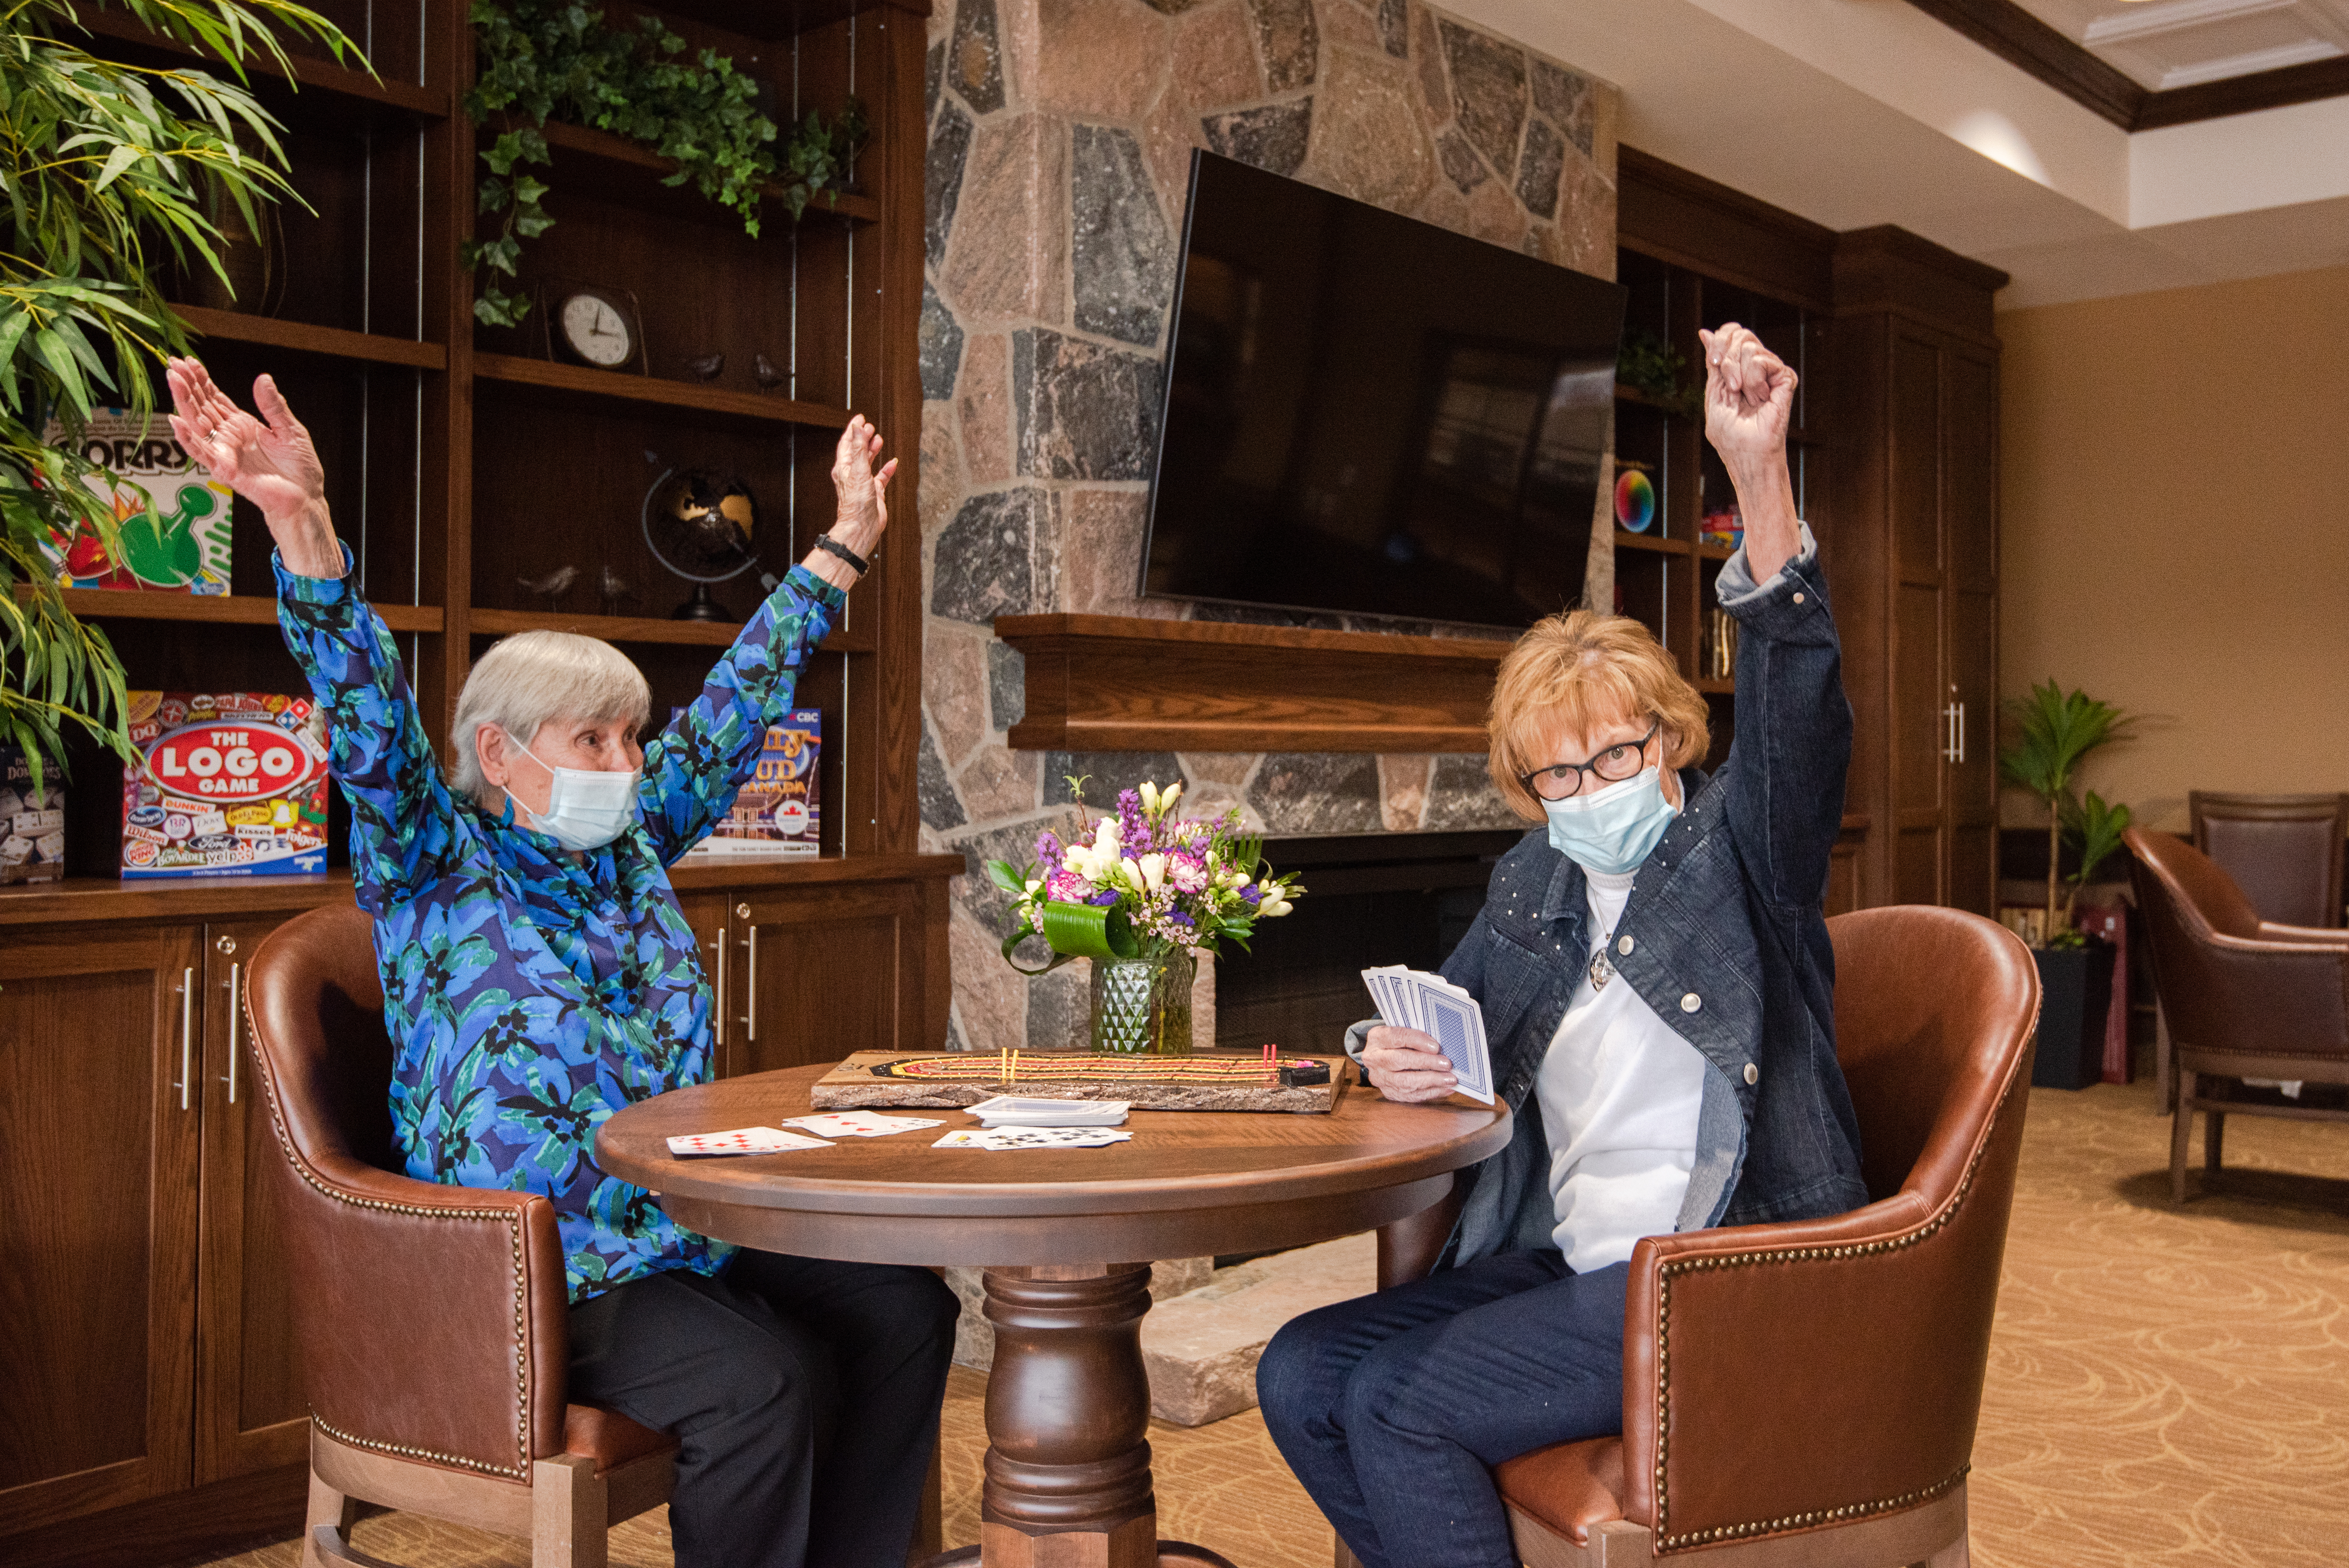 Two residents playing cards in the Social Club, hands raised in victory